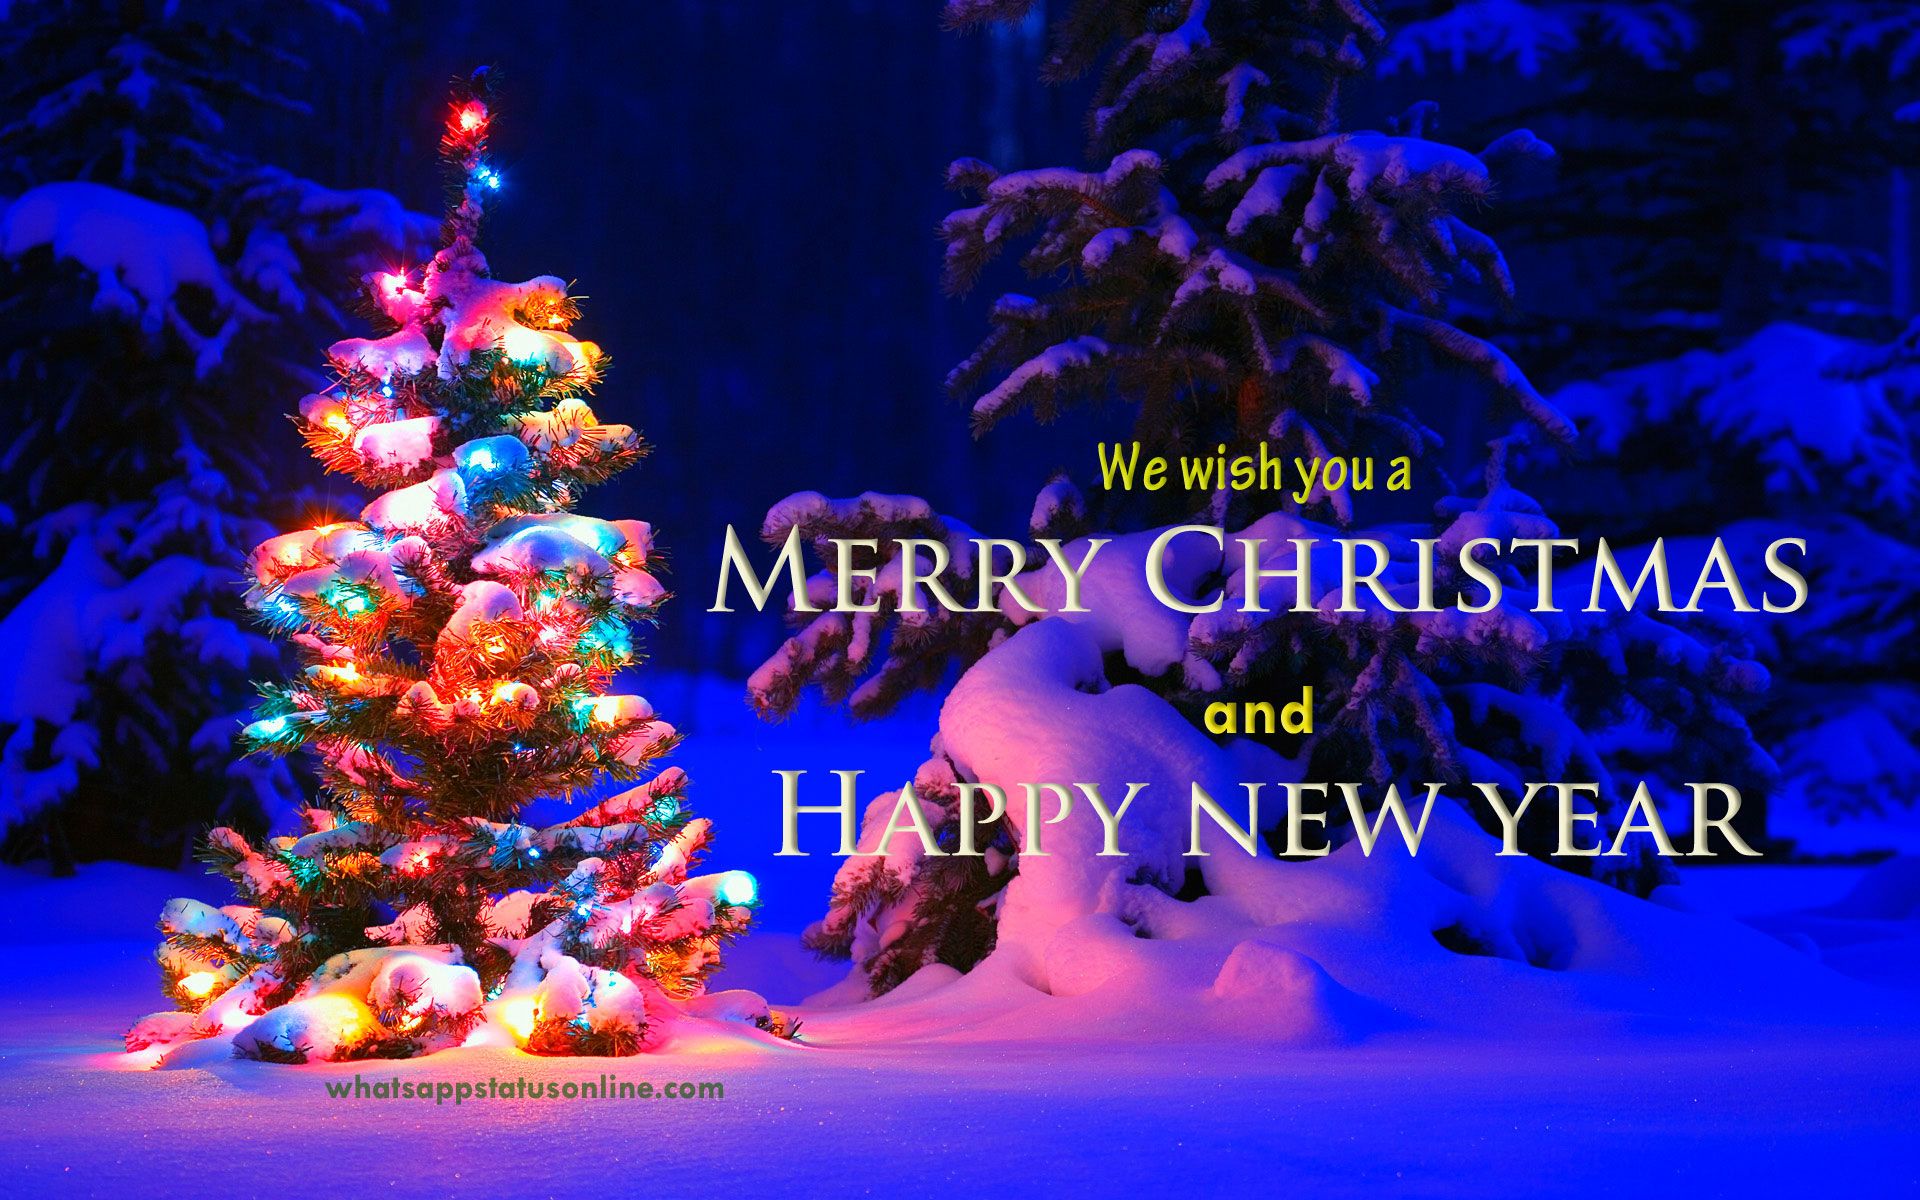 New Merry Christmas Images Hd - HD Wallpaper 